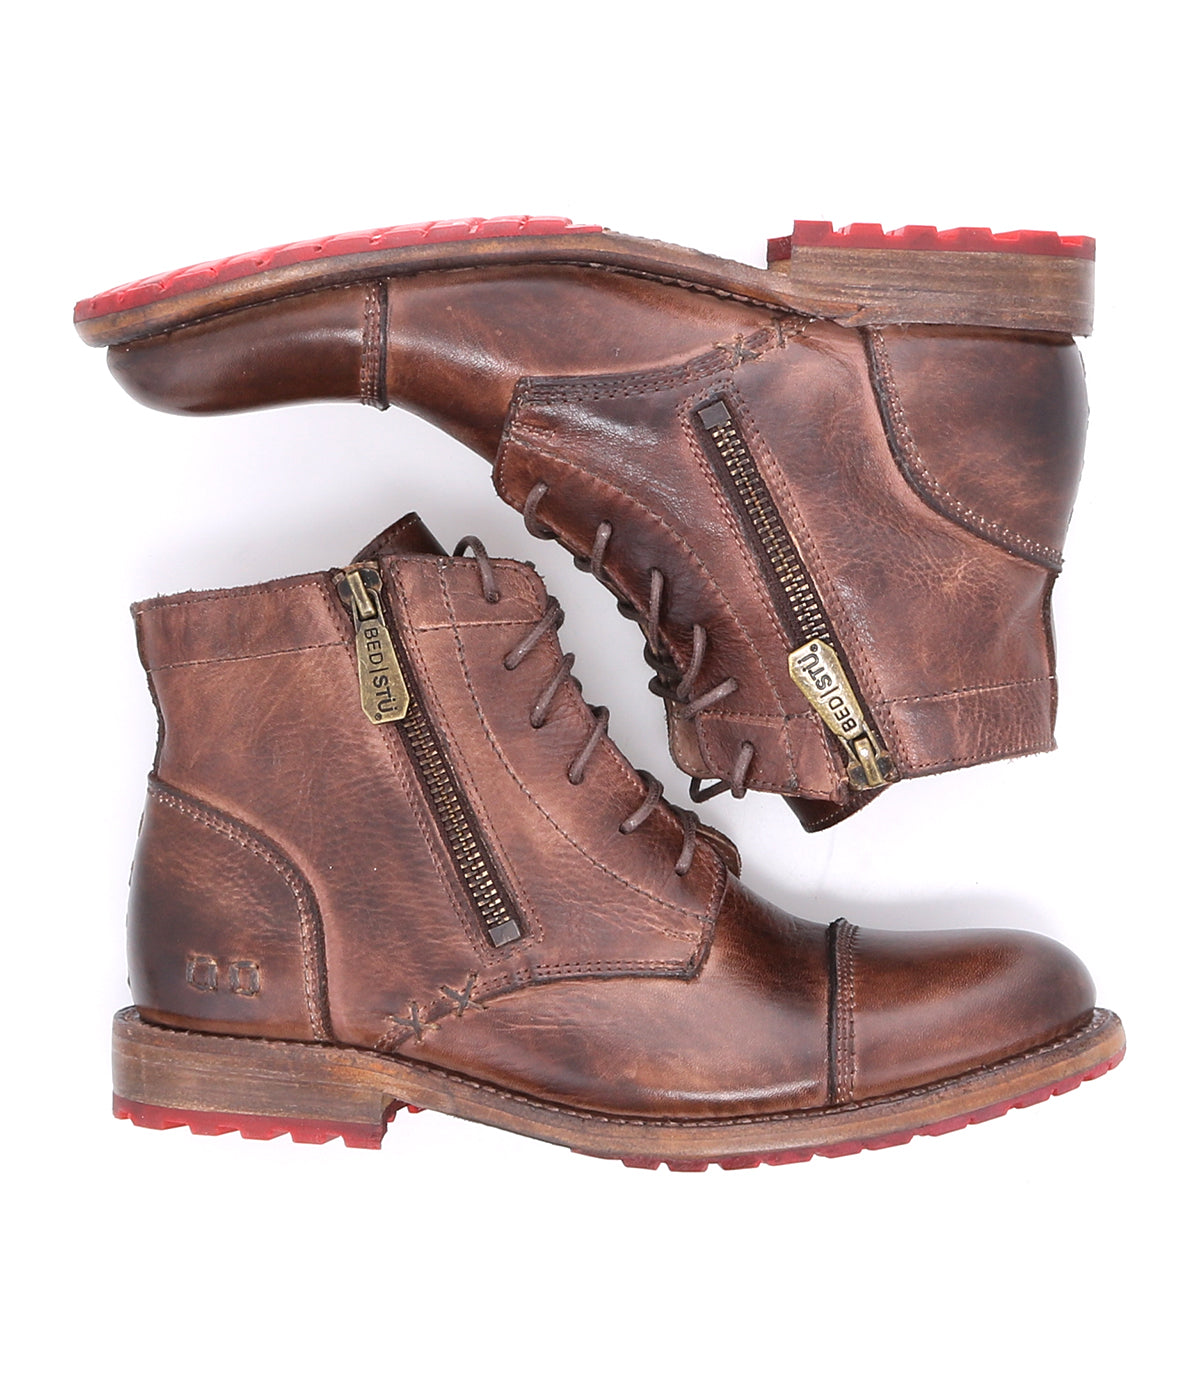 A pair of Bonnie II brown leather boots with red soles from Bed Stu.